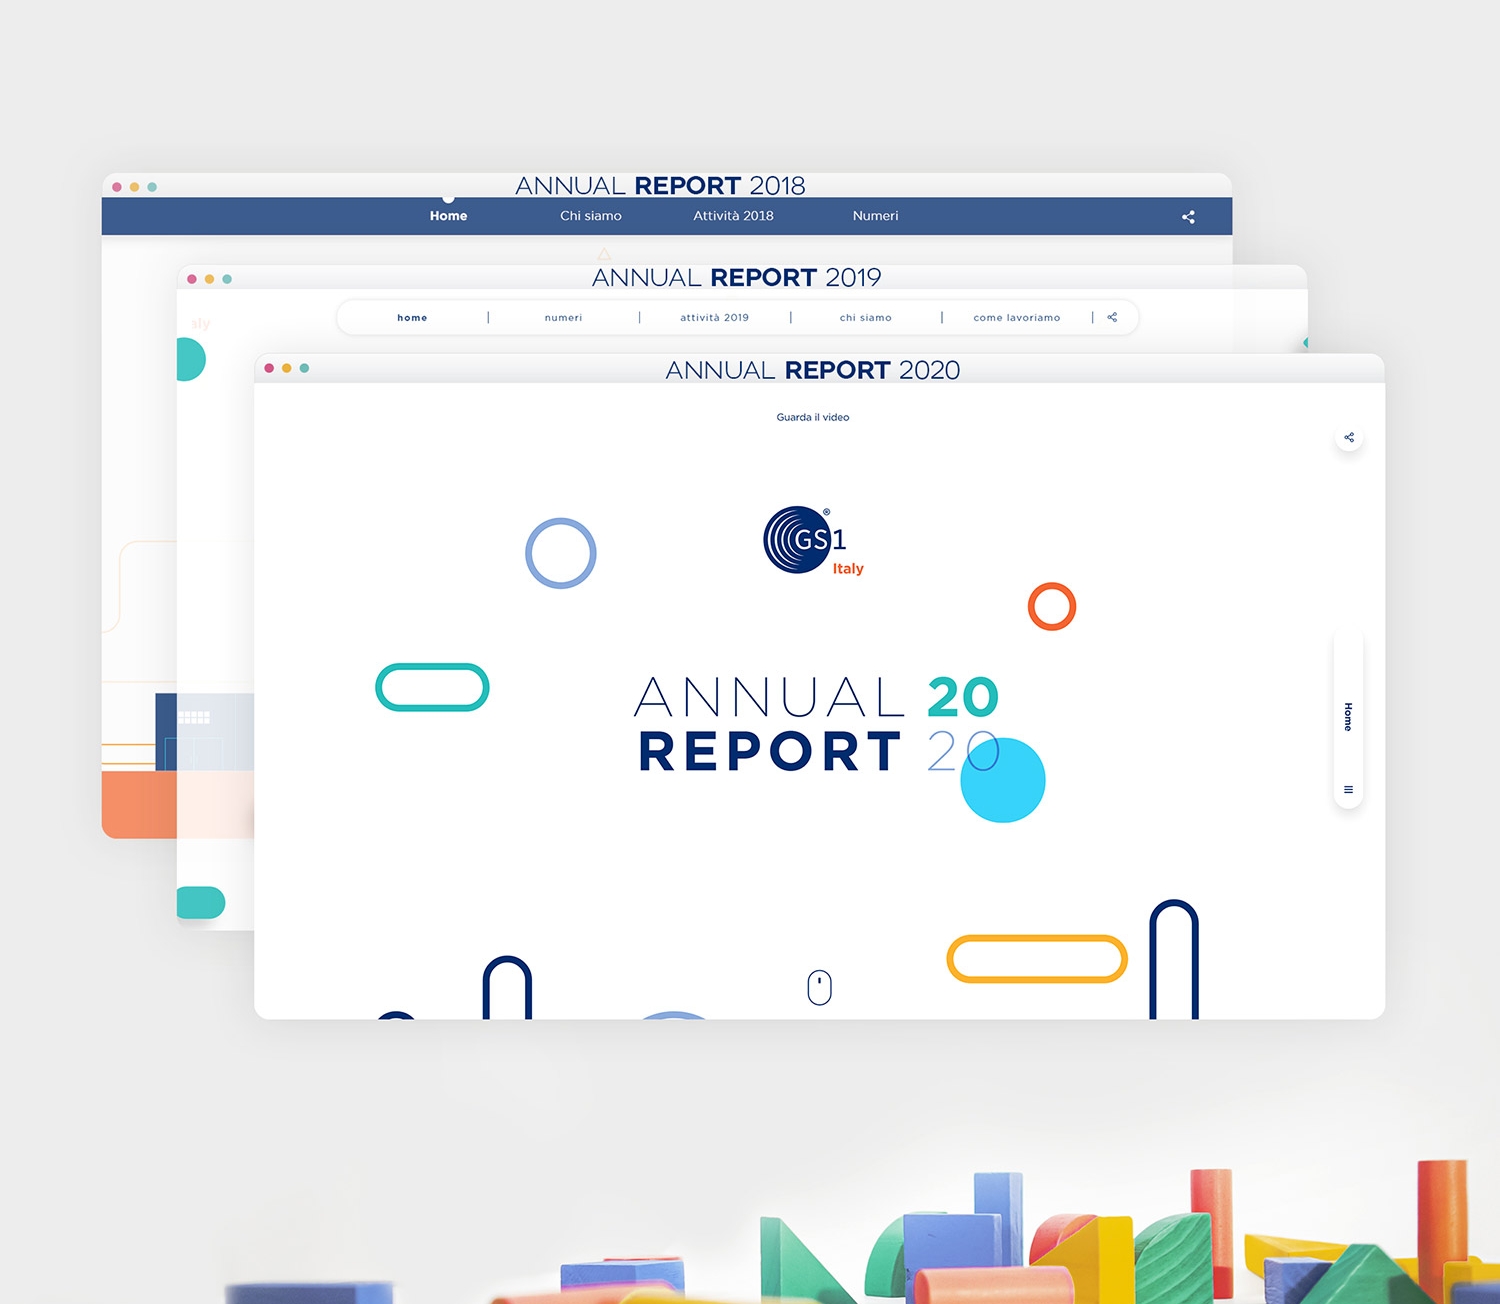 The annual report becomes interactive!